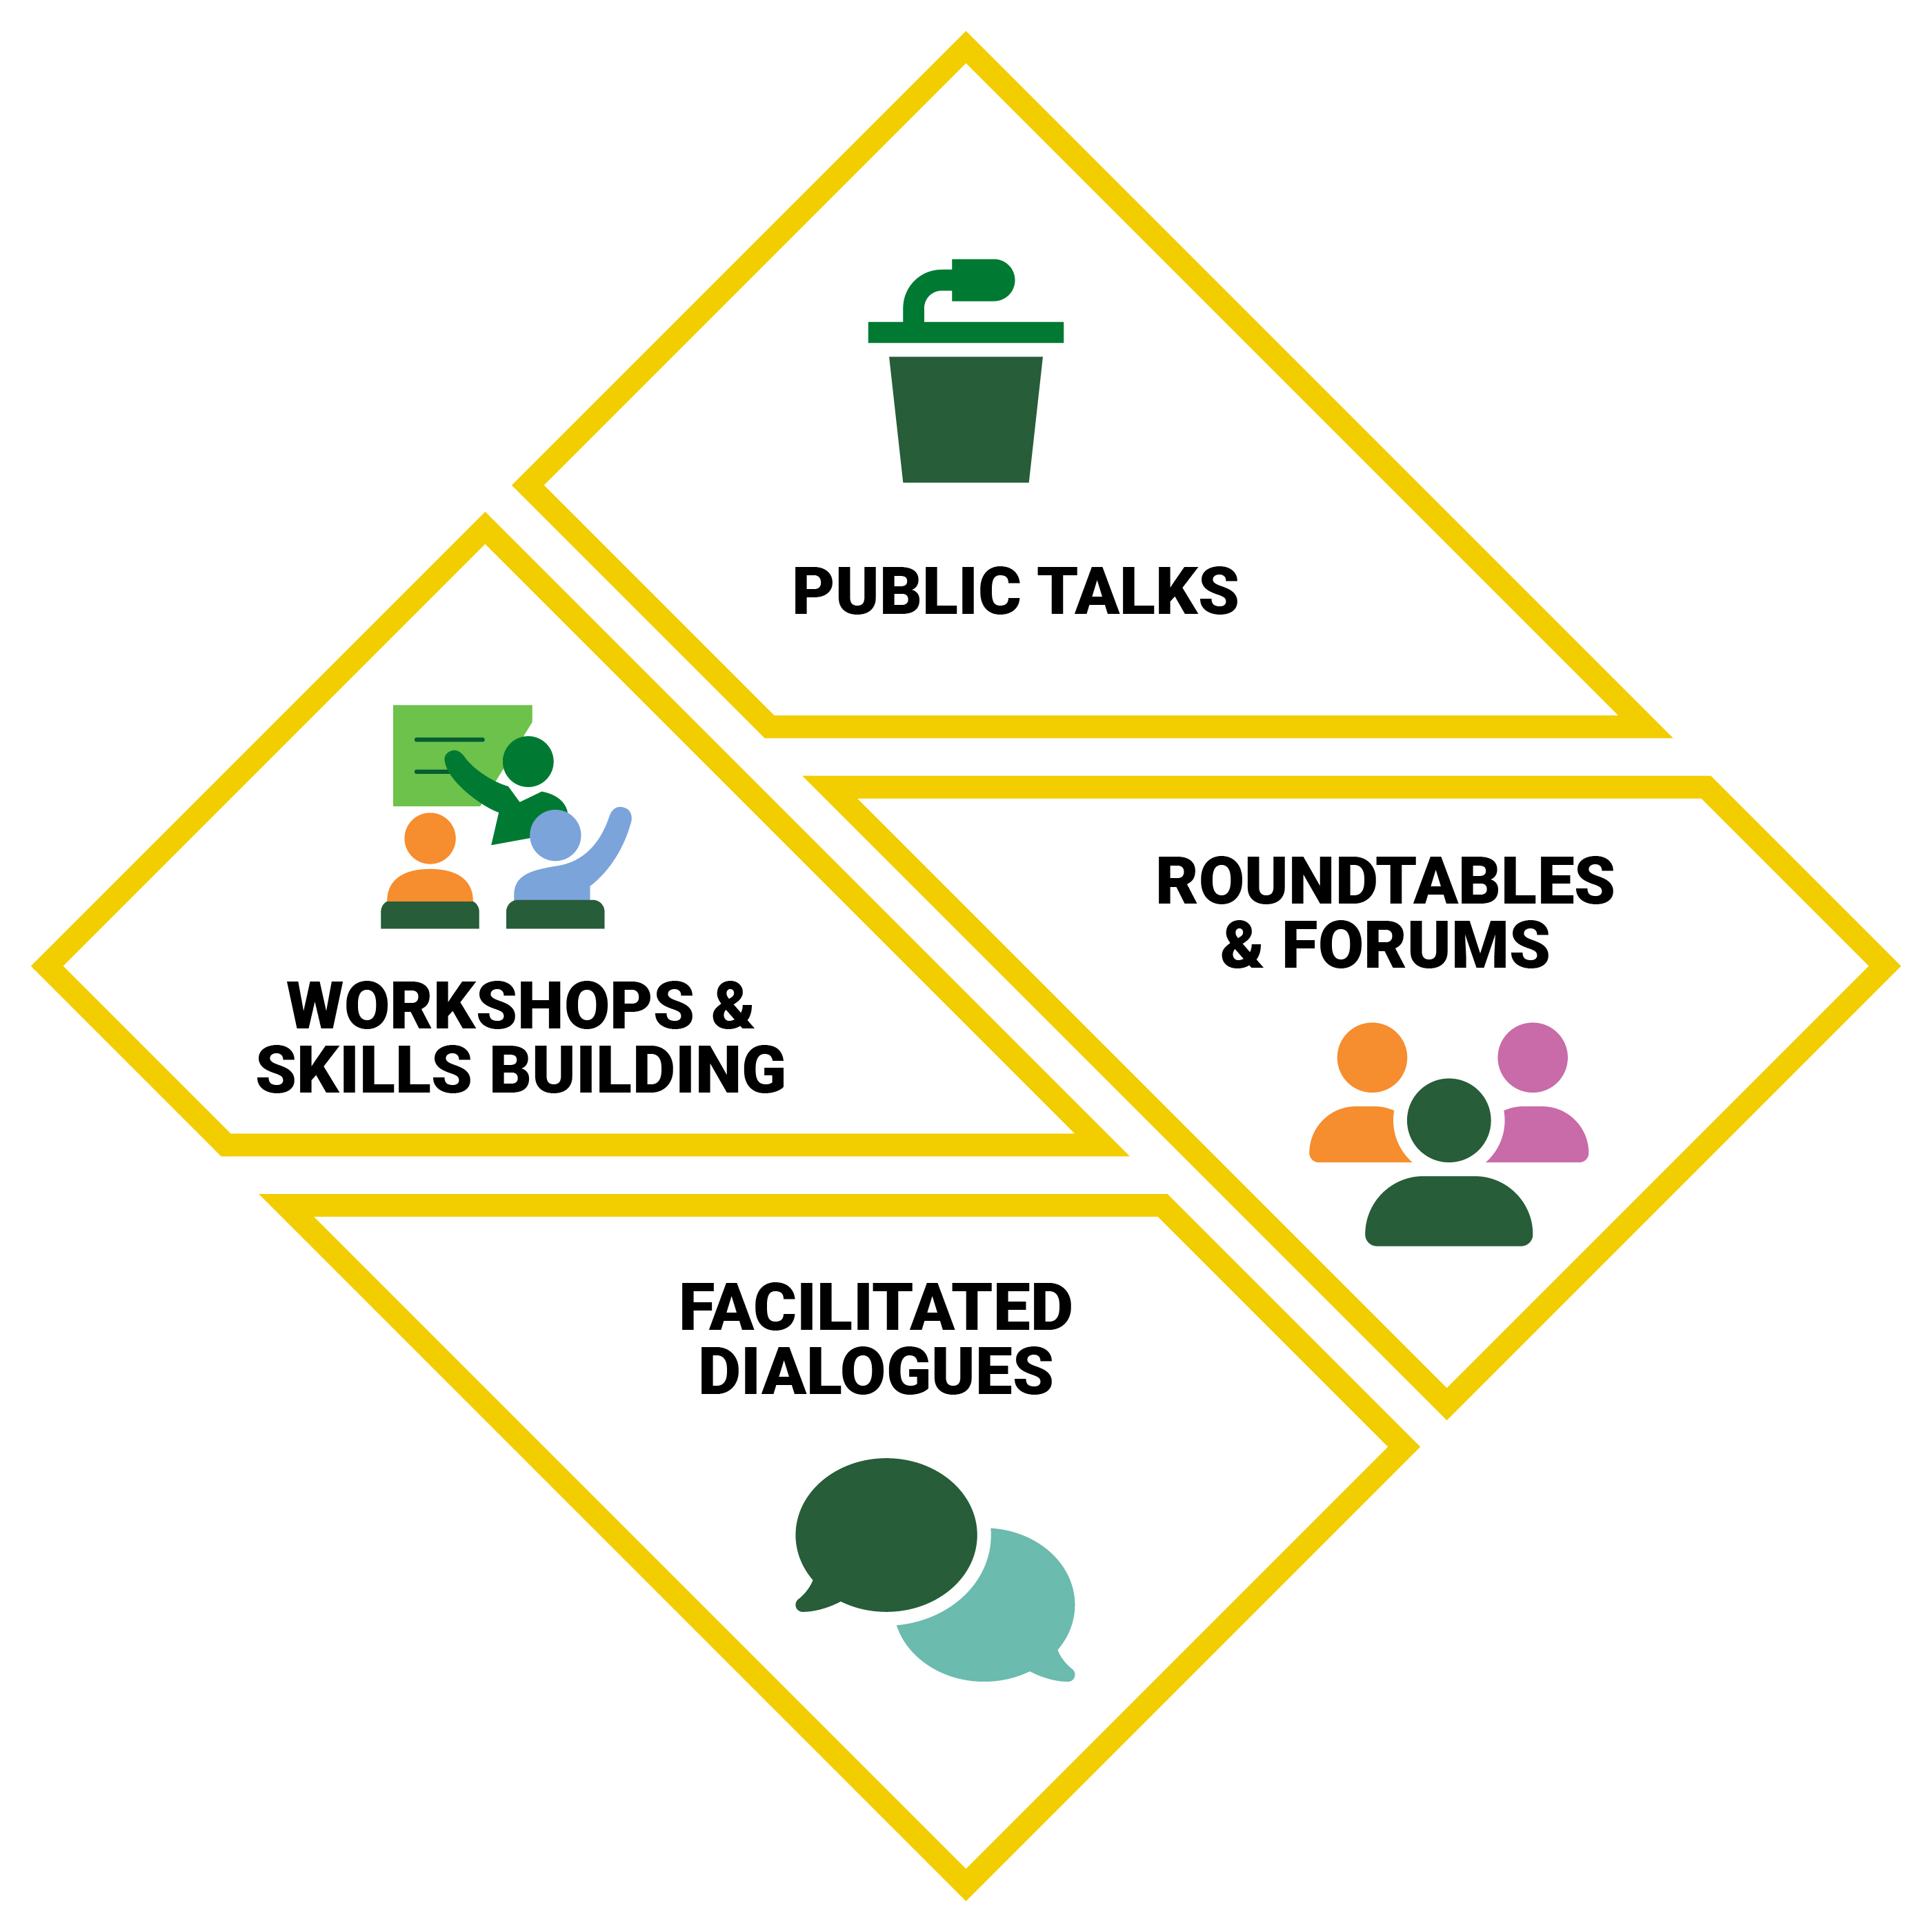 Public Talks, Roundtables and Forums, Facilitated Dialogues, and Workshops and Skills Building